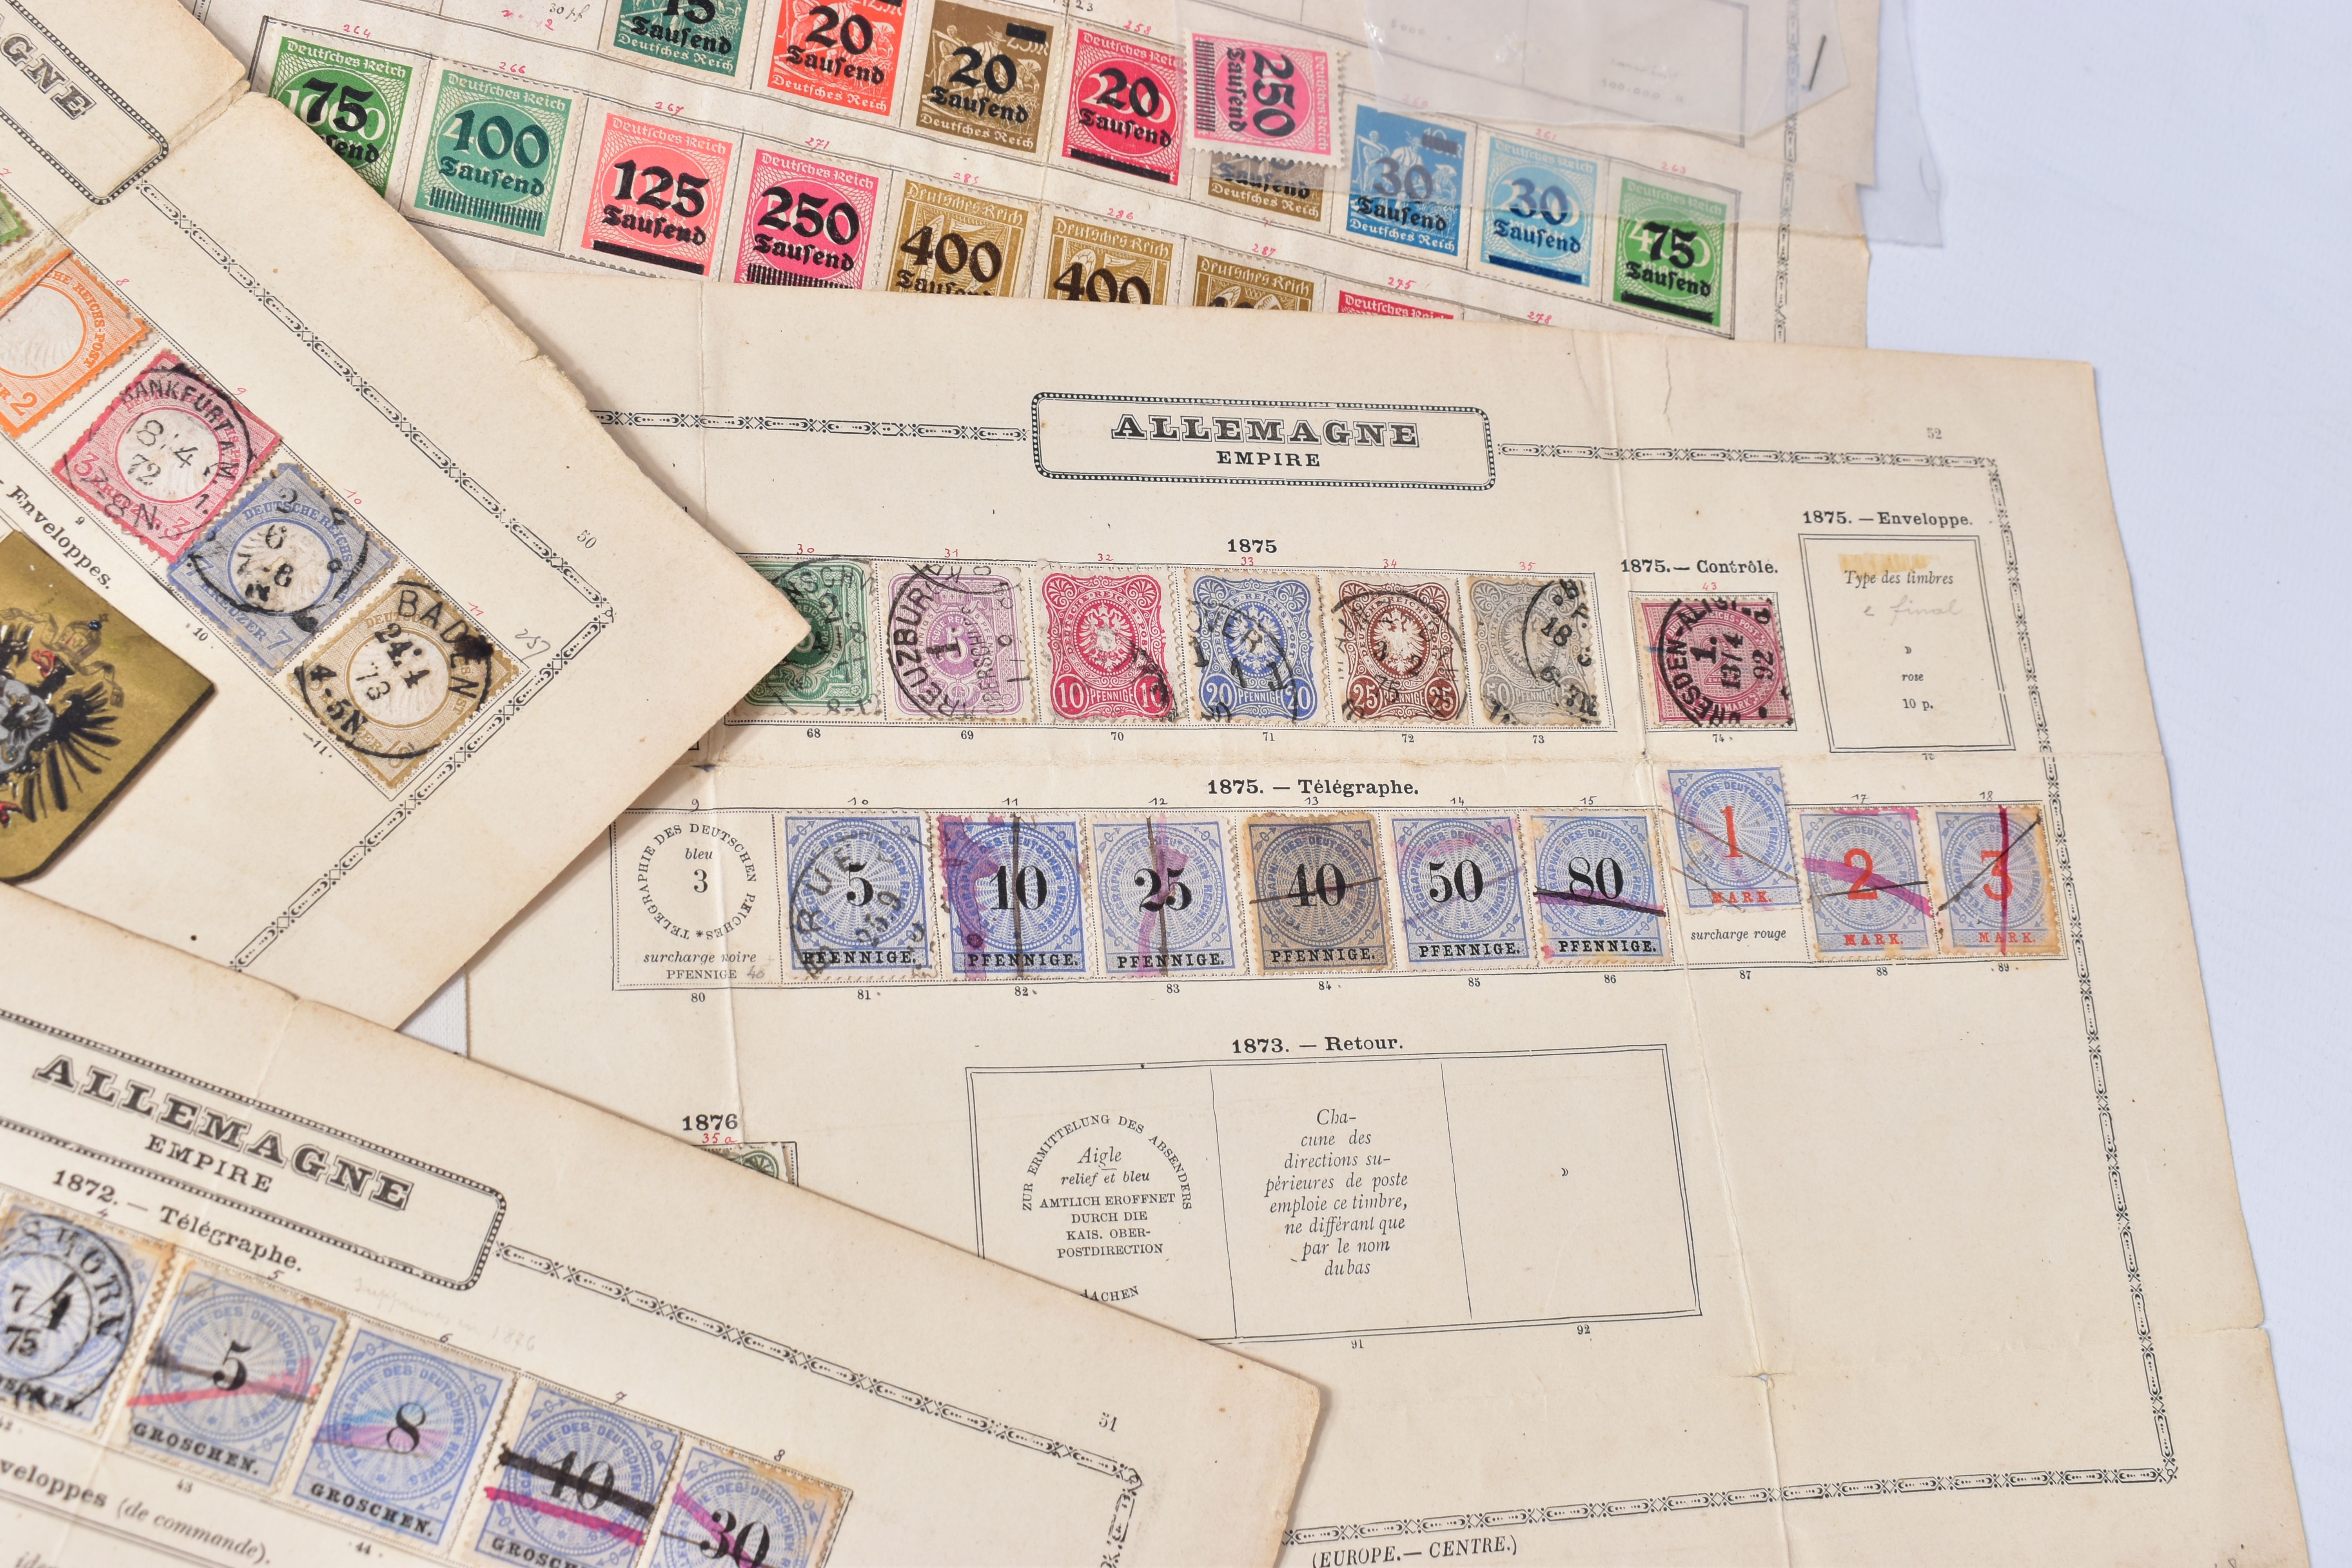 FOLDER OF OLD GERMAN STAMPS, on album pages from 1875 to 1920s, also note some revenues from the - Image 3 of 5